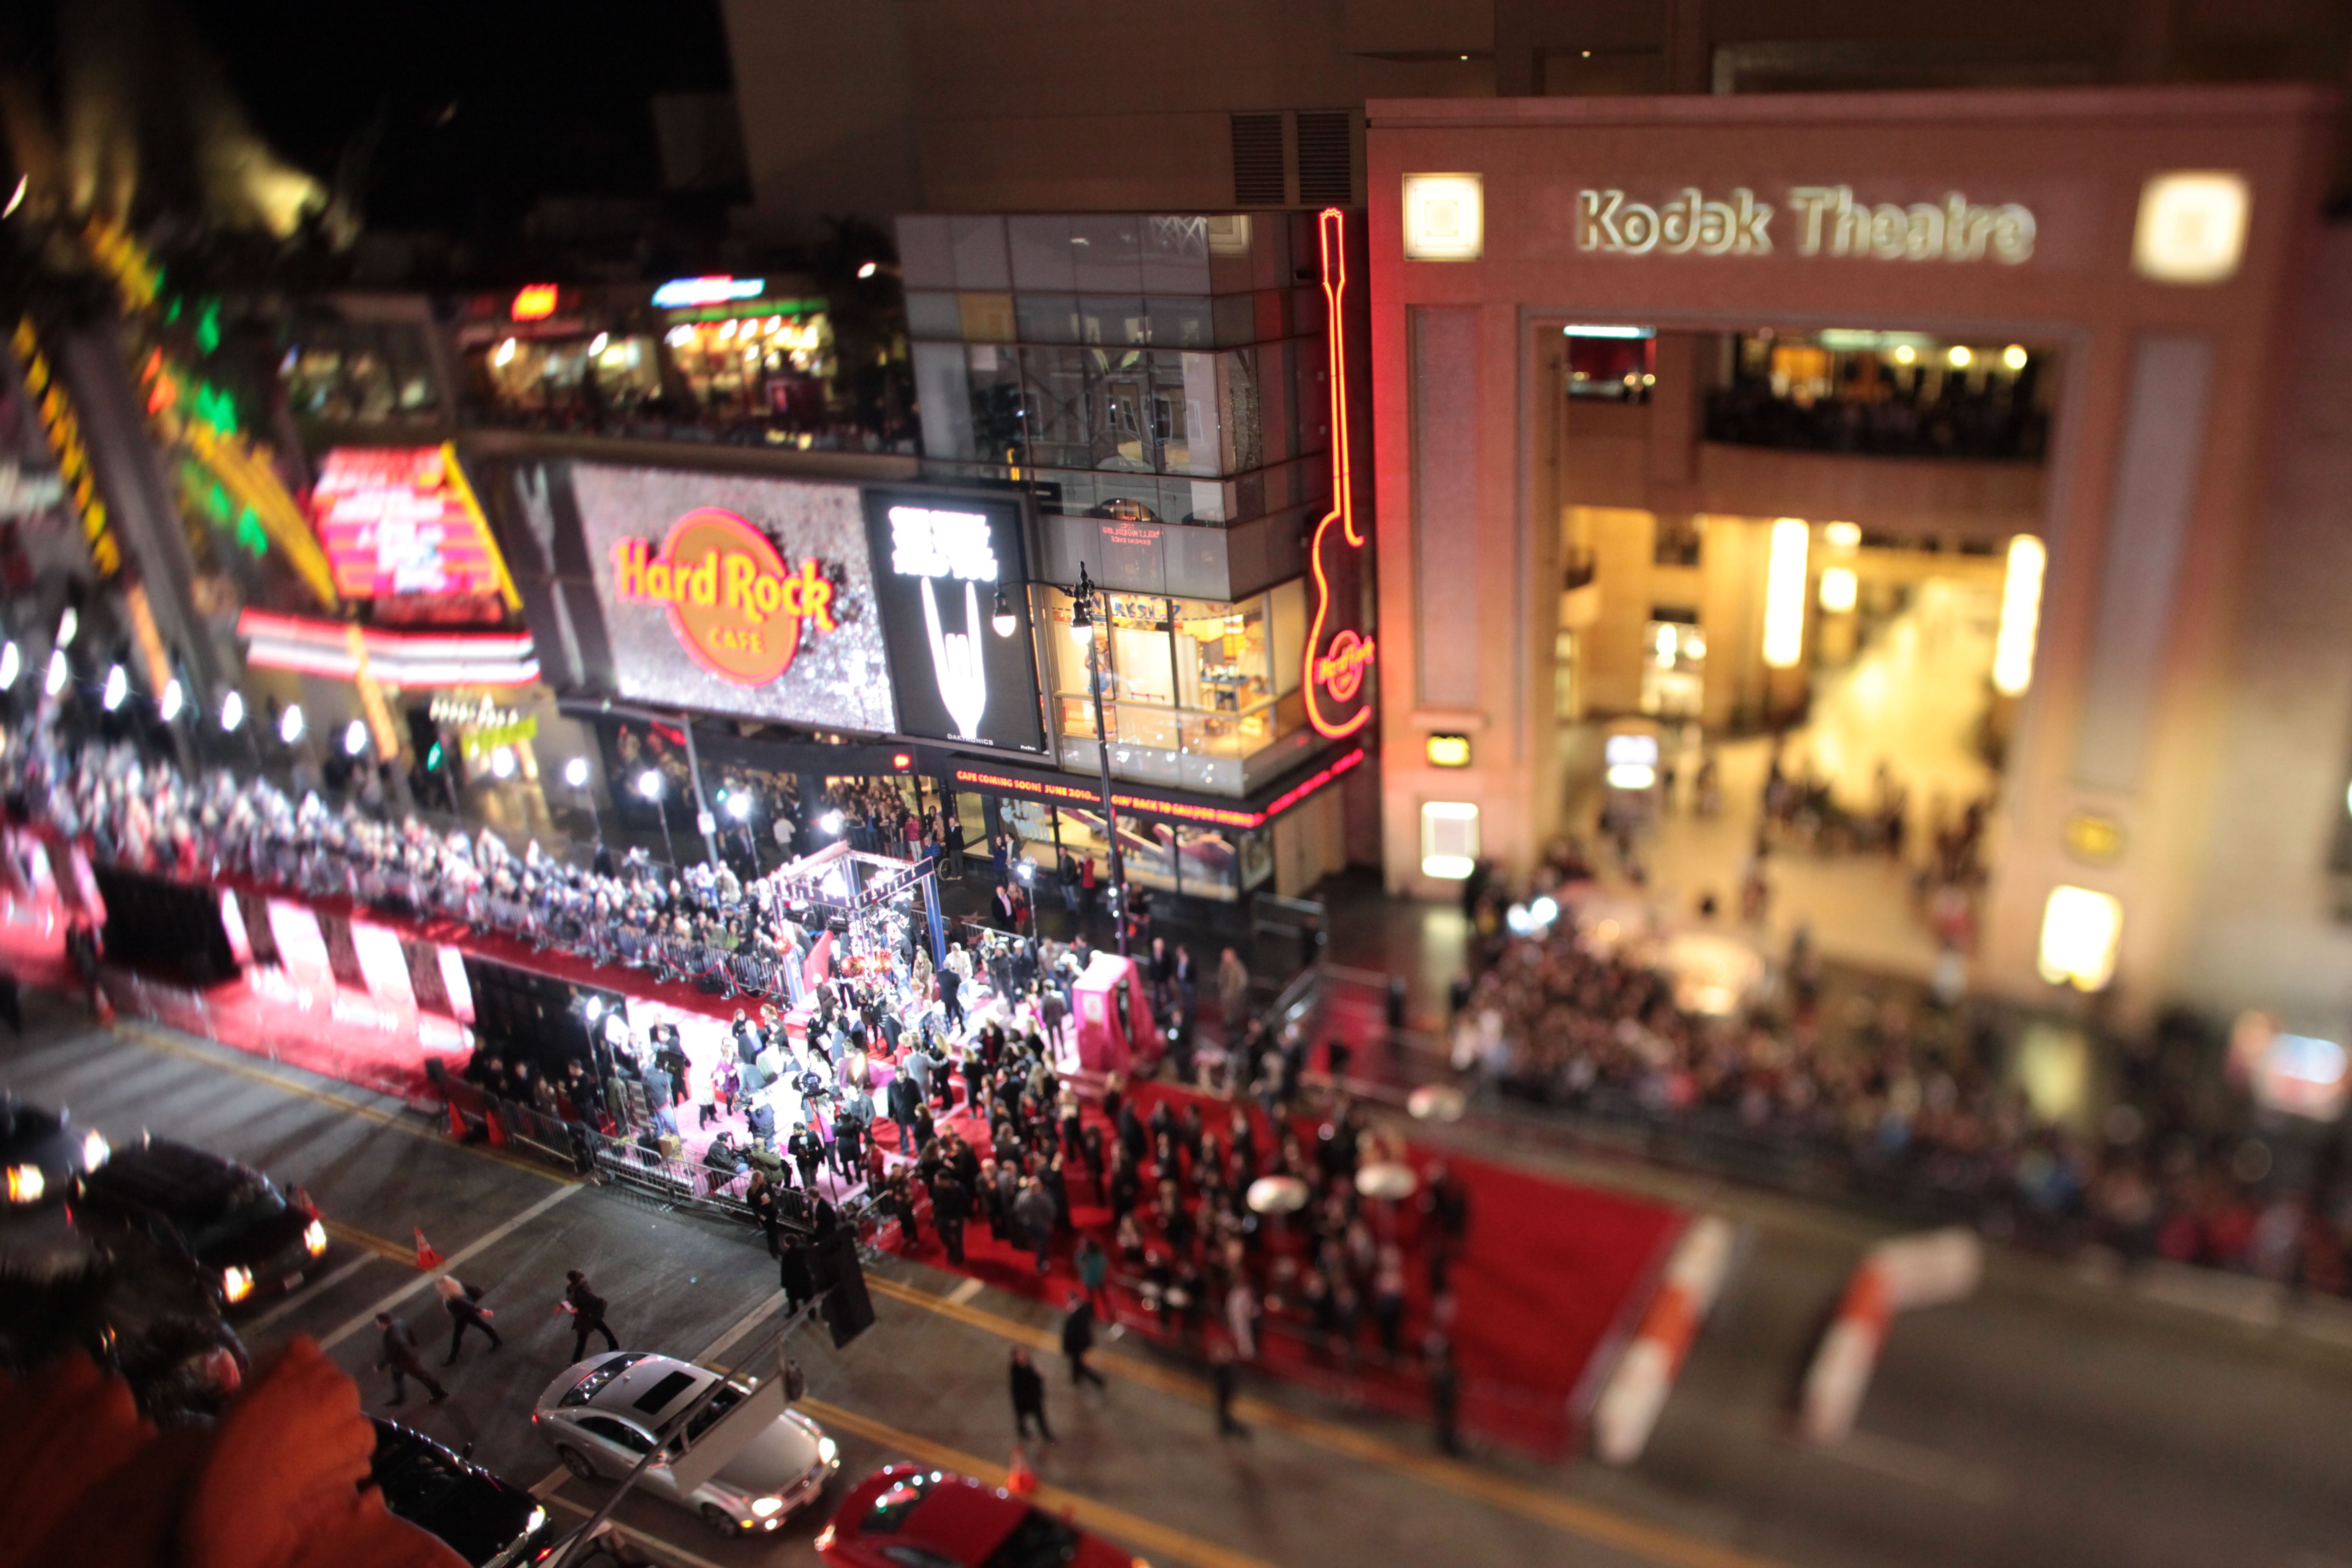 CH’s Picture of the Day: Red Carpet [Day 108]